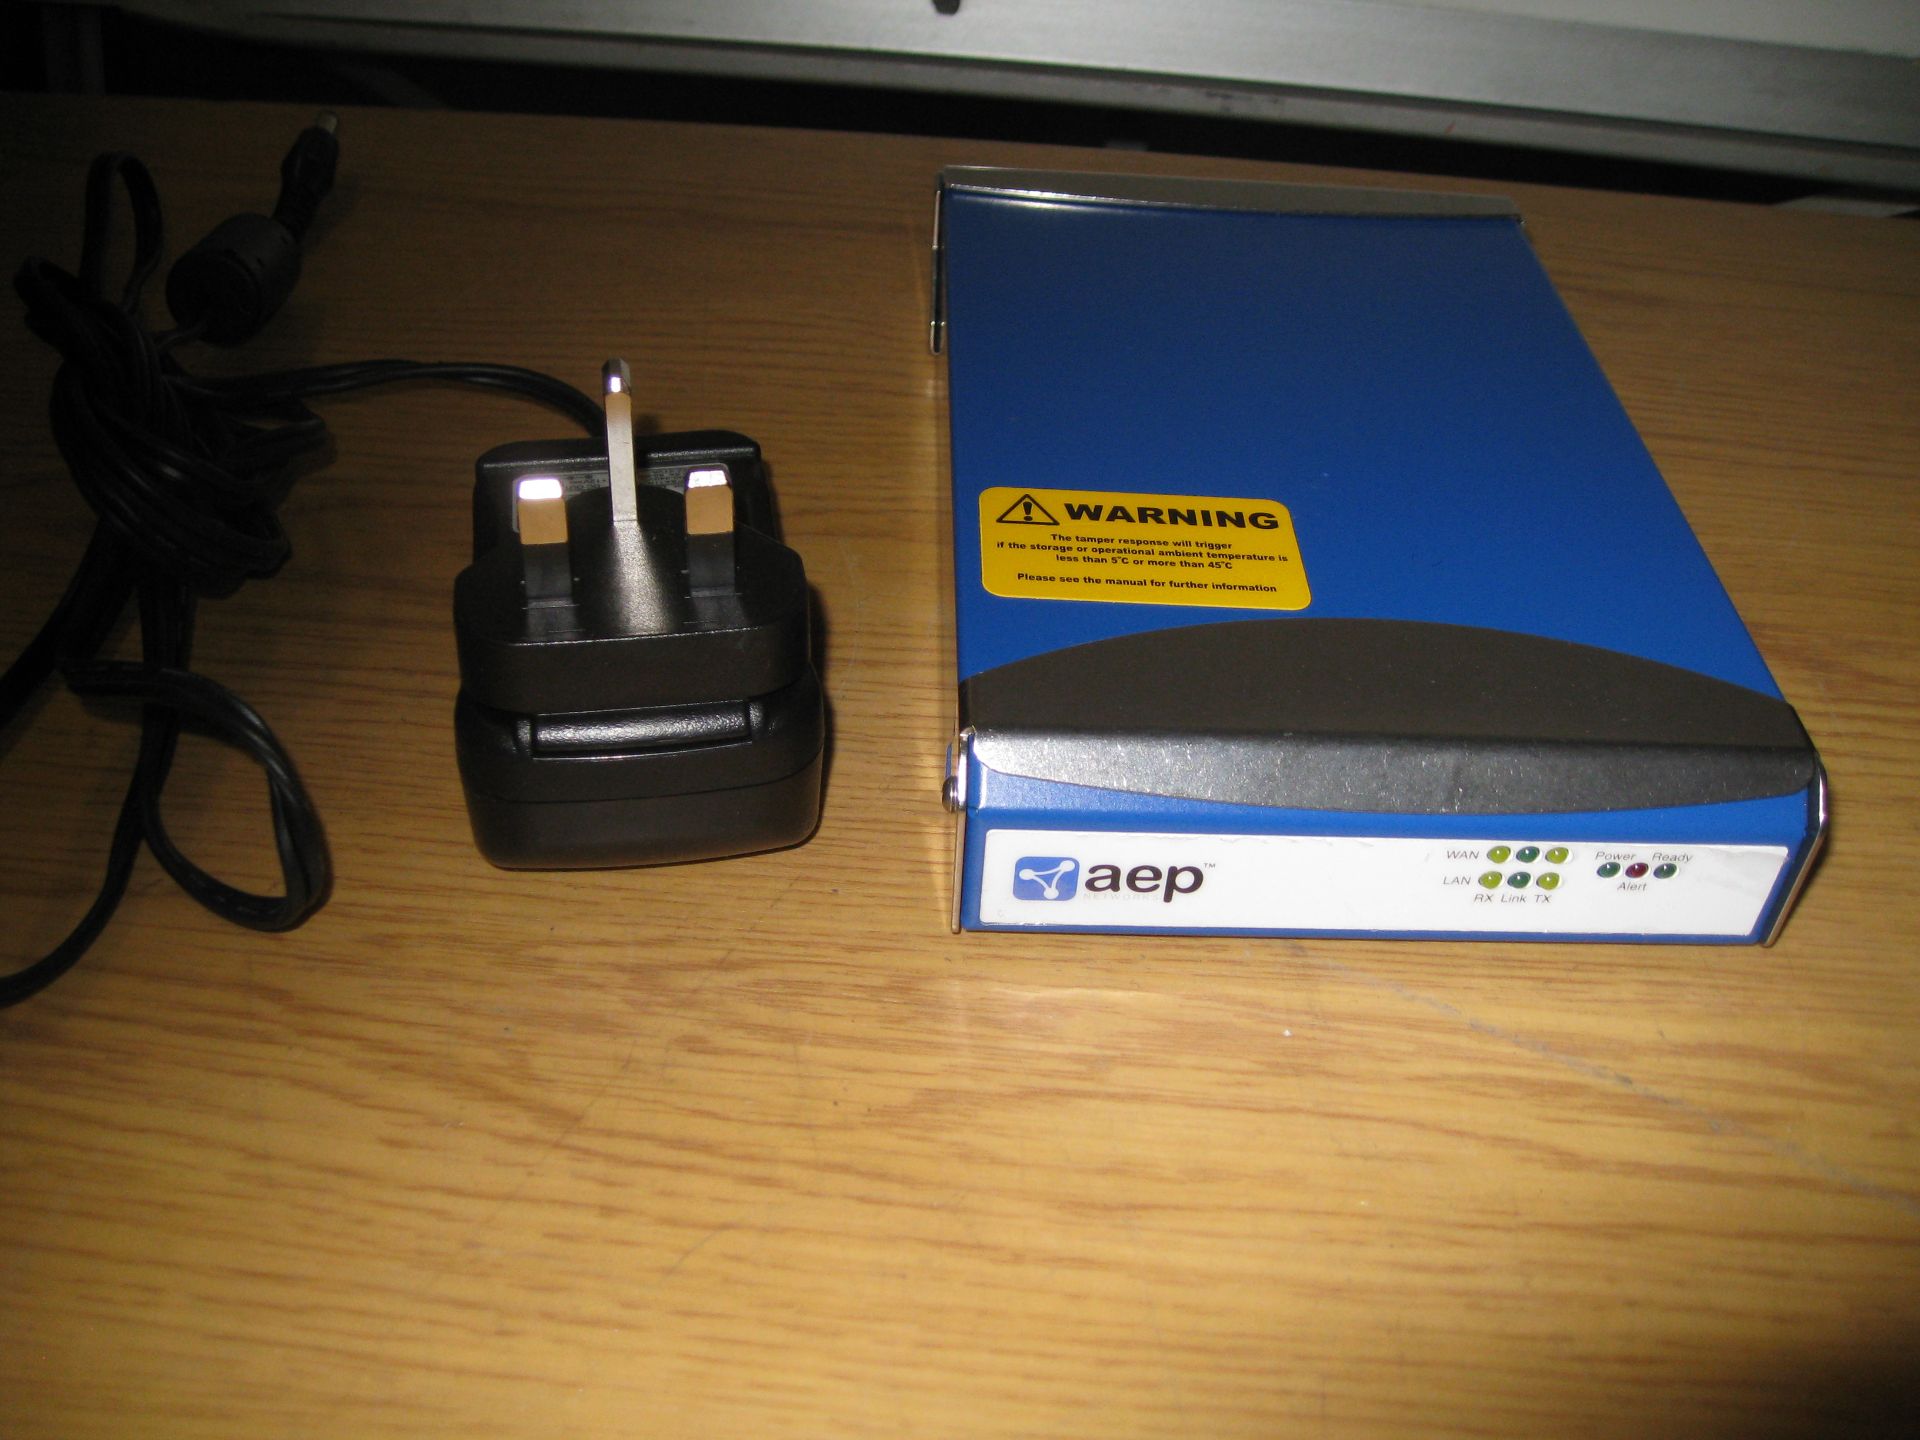 AEP Net Remote encryptor hardware VPN (virtual private network) client with psu. More info at: www.